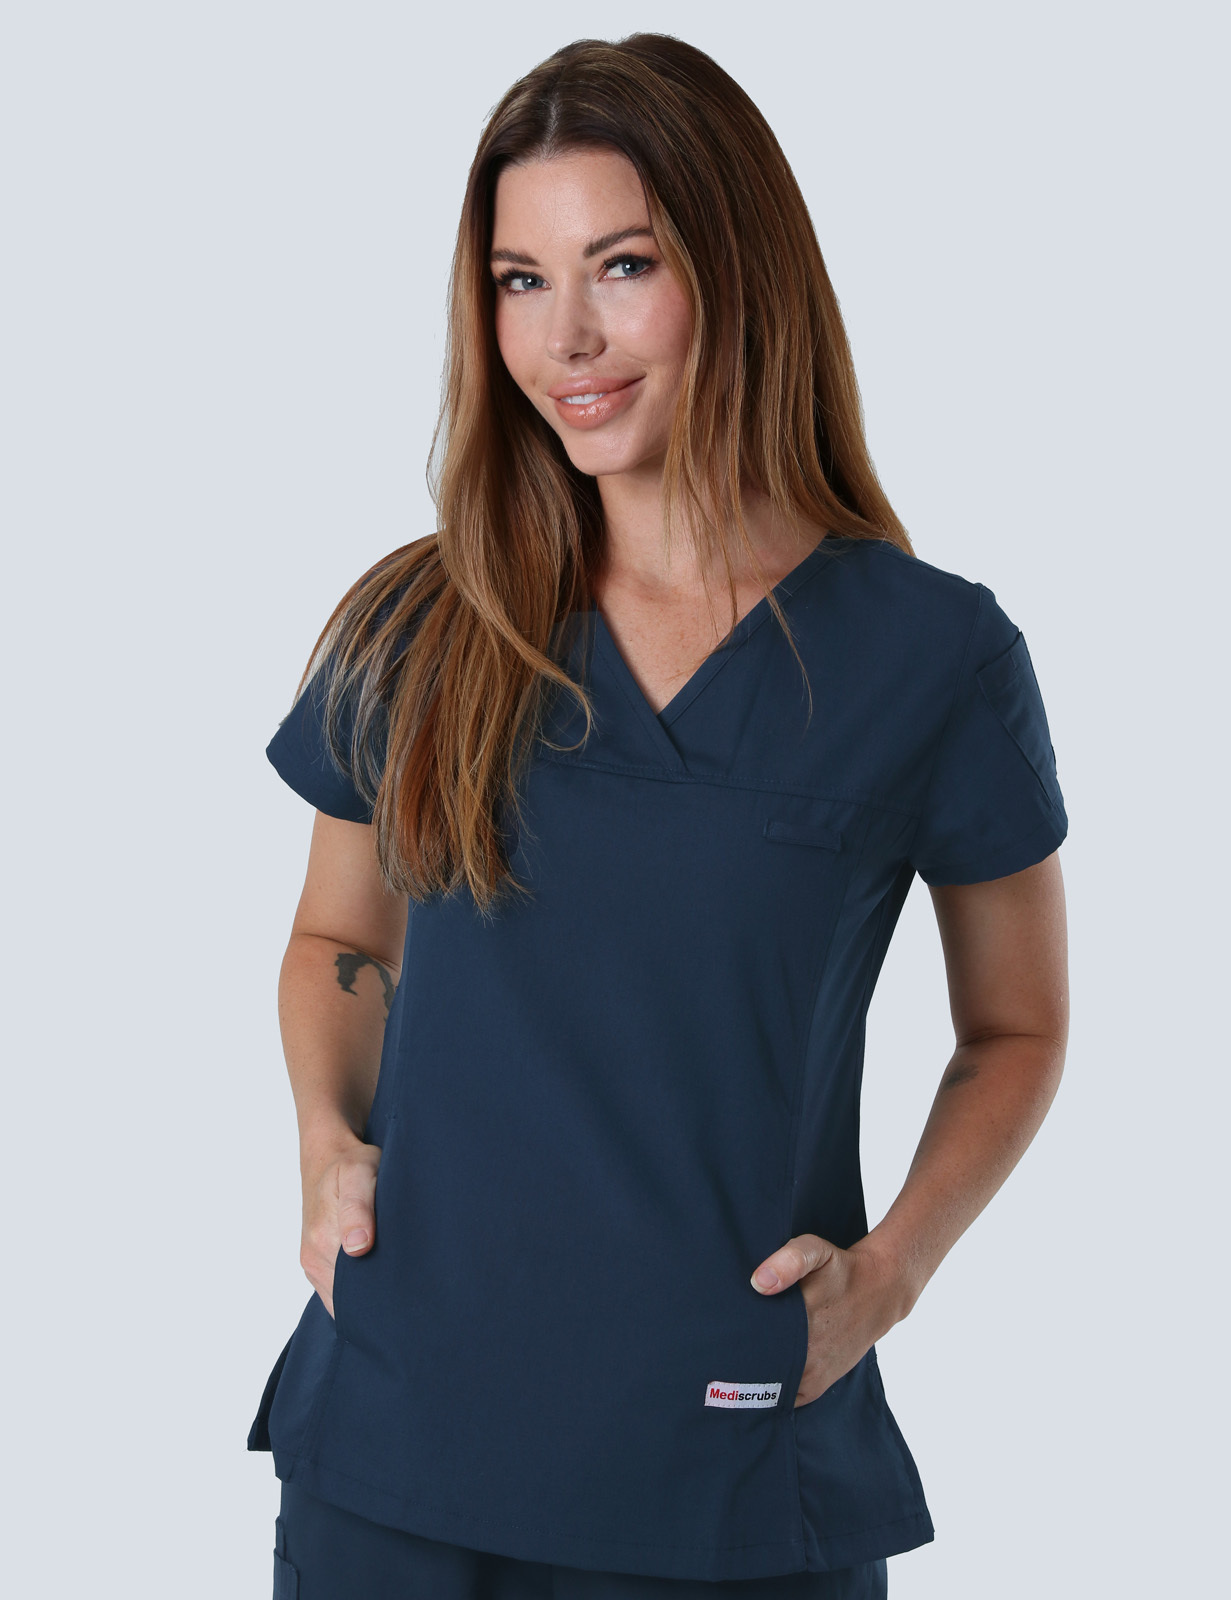 Frankston - AAAU/CNS (Women's Fit Solid Scrub Top in Navy incl Logos)